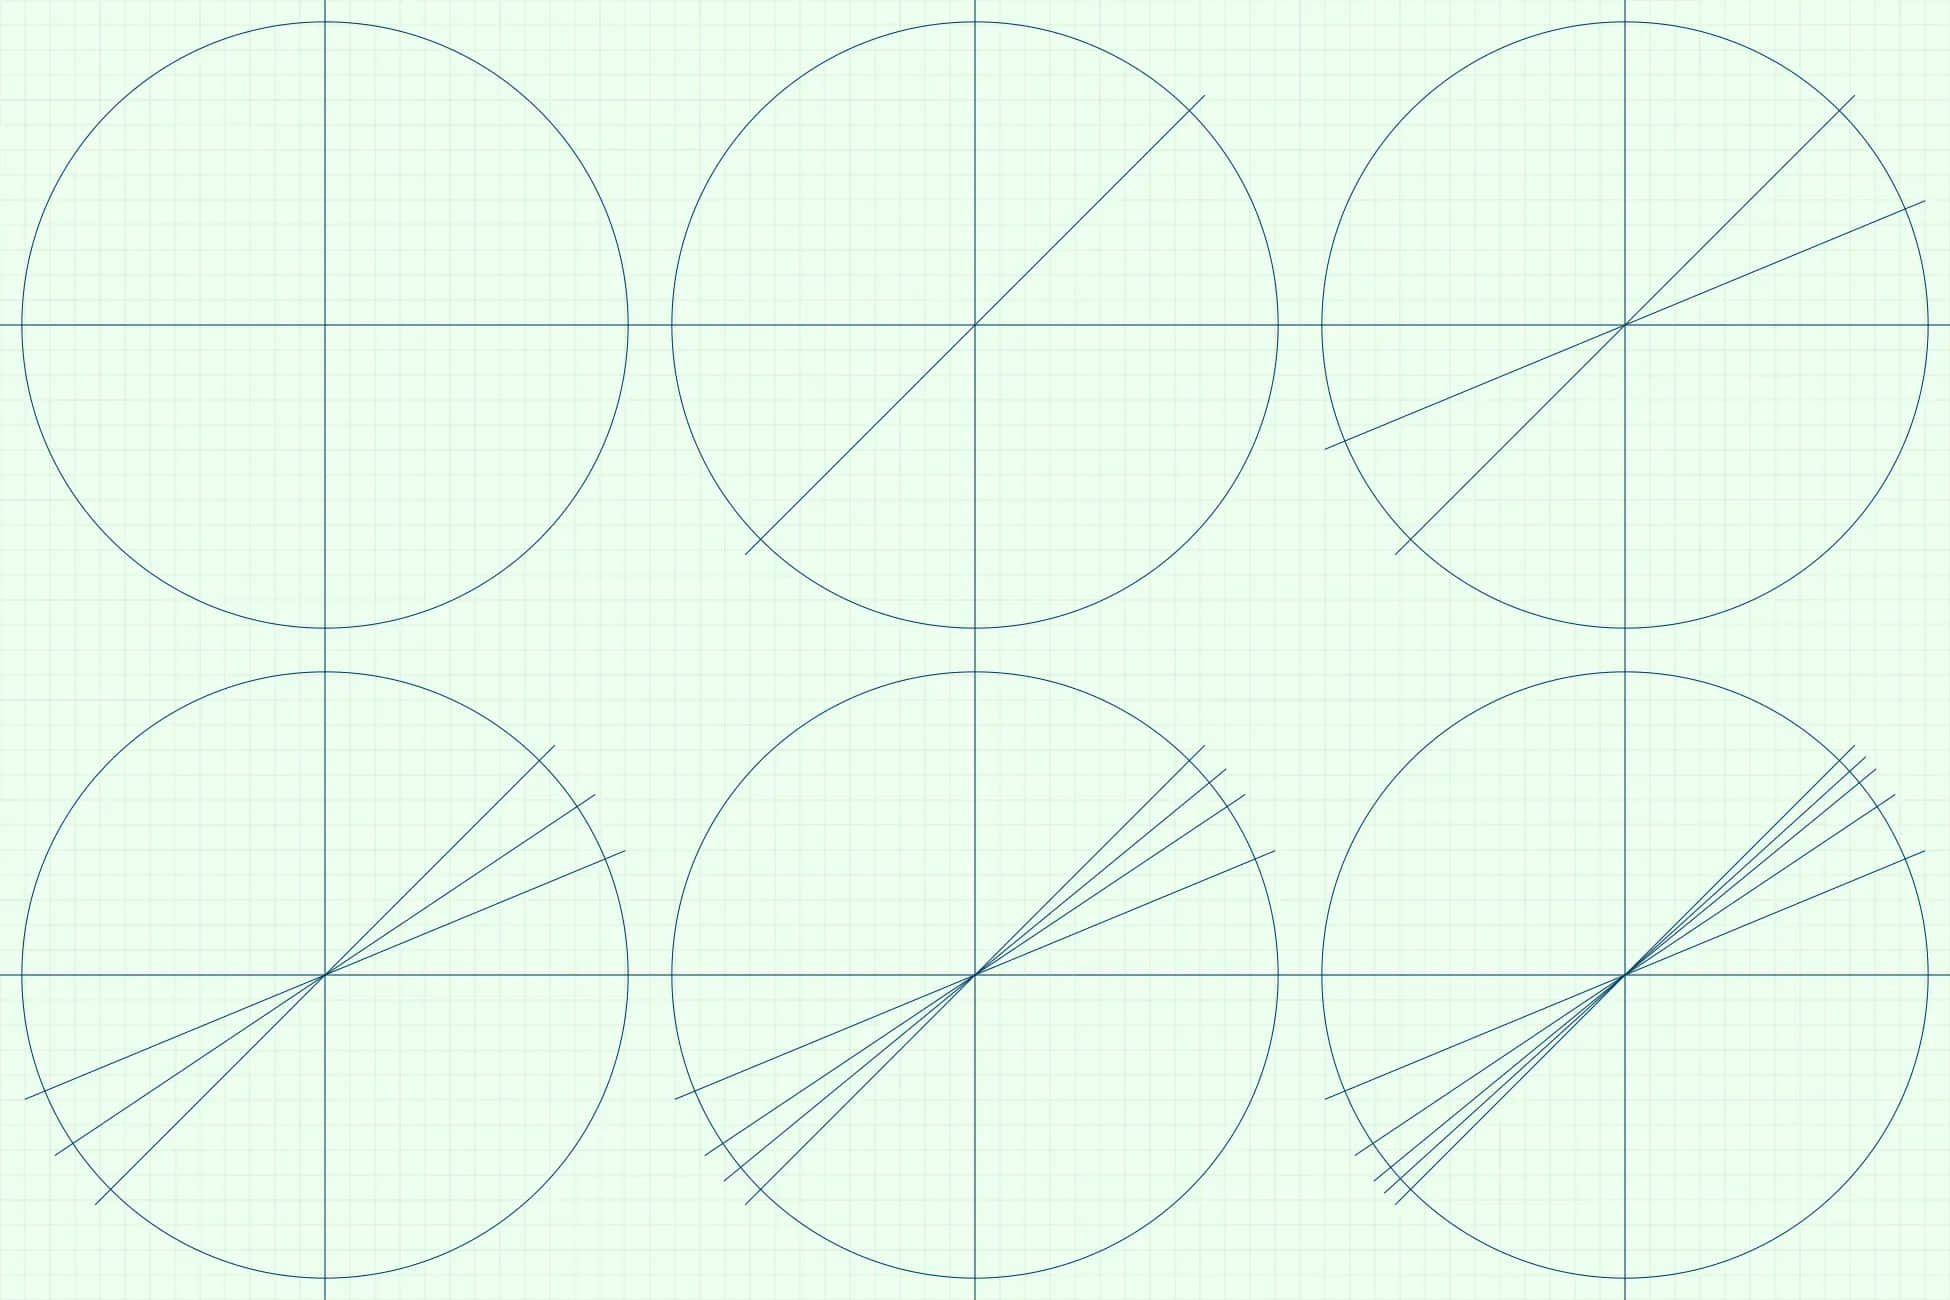 If you are careful, you can keep dividing to find 1/128 of a circle.